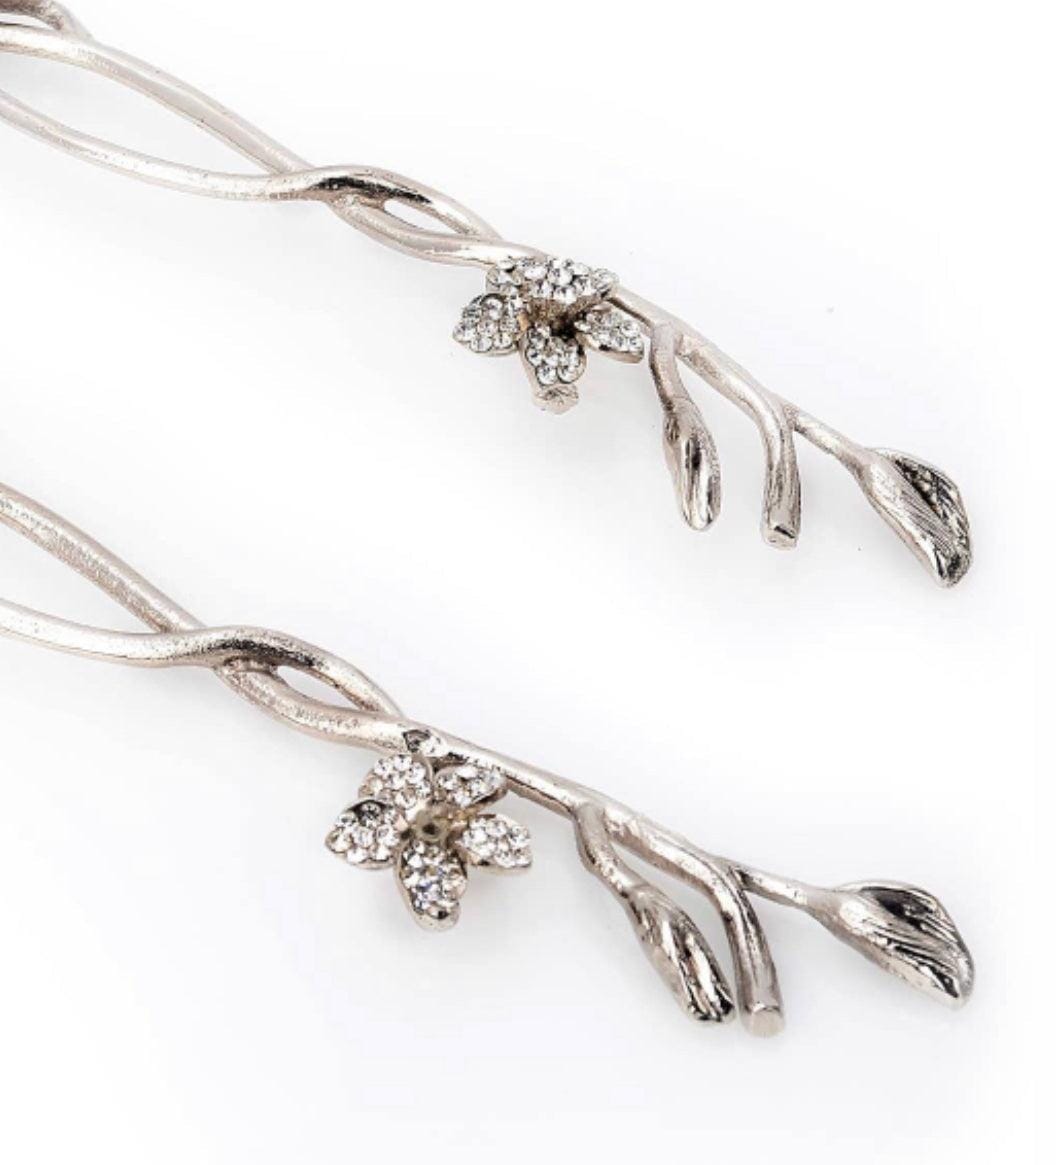 Salad Servers With Jeweled Flower Salad server set High Class Touch - Home Decor 